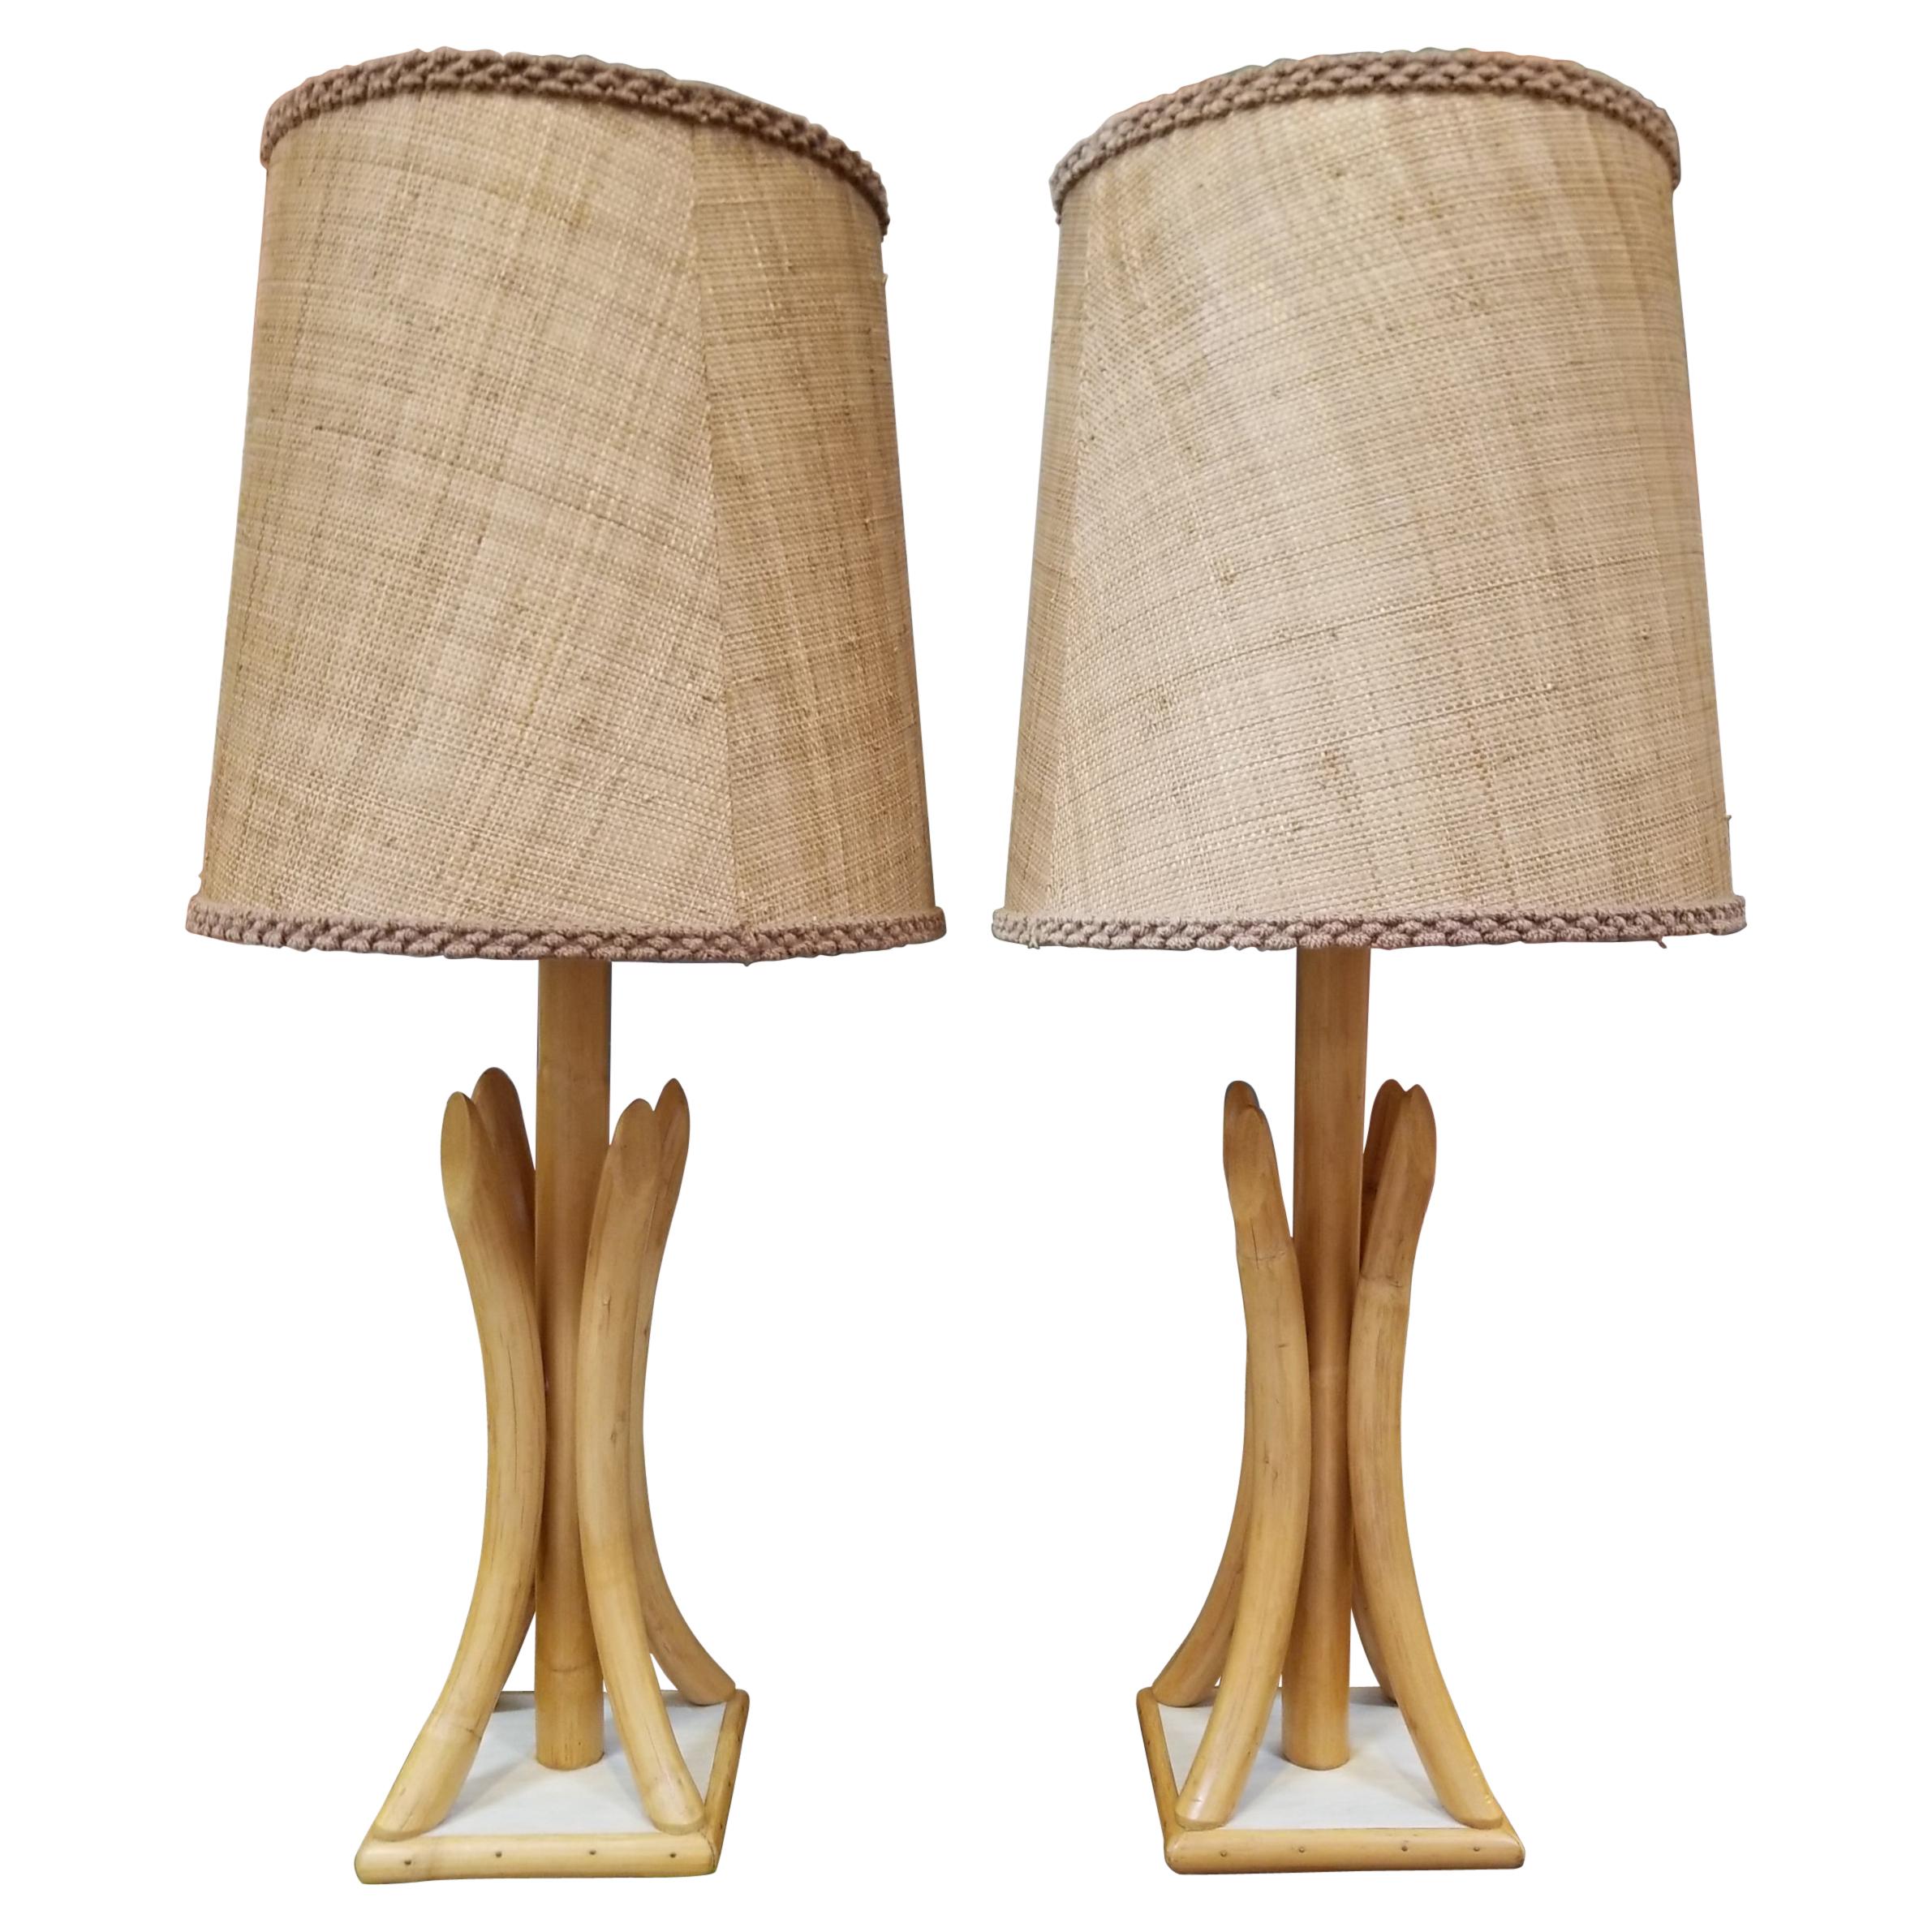 1950 S Bamboo Rattan Table Lamps For, Lamps And Shades Jacksonville Florida